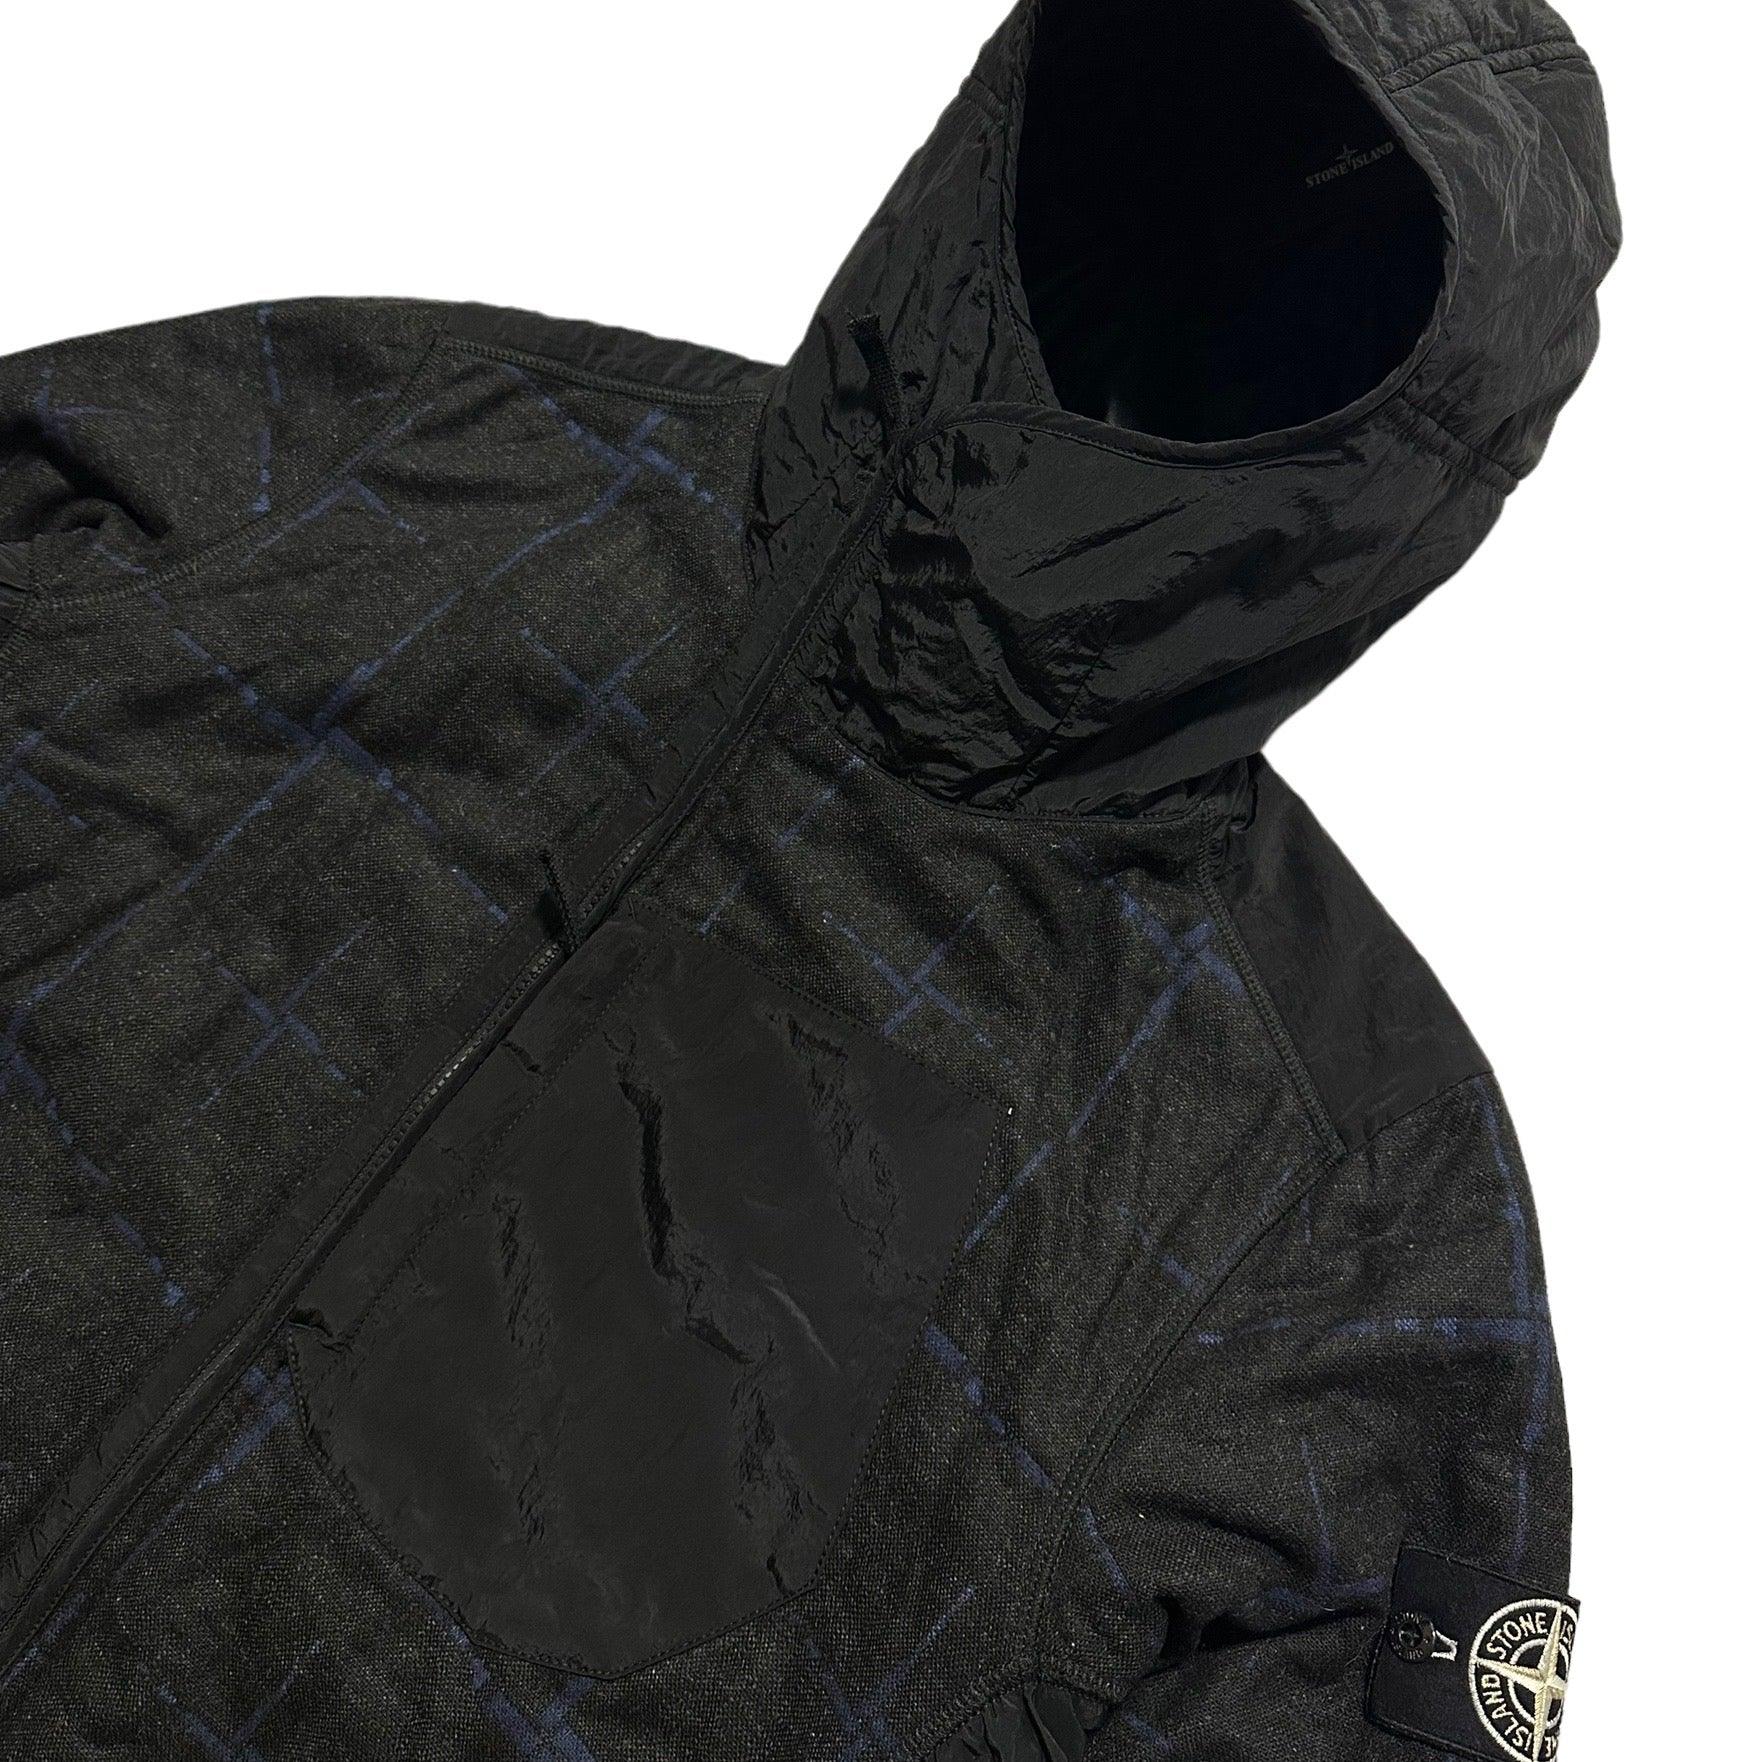 Stone Island Dormeuil House Check Primaloft Jacket with Special Process Badge - Known Source